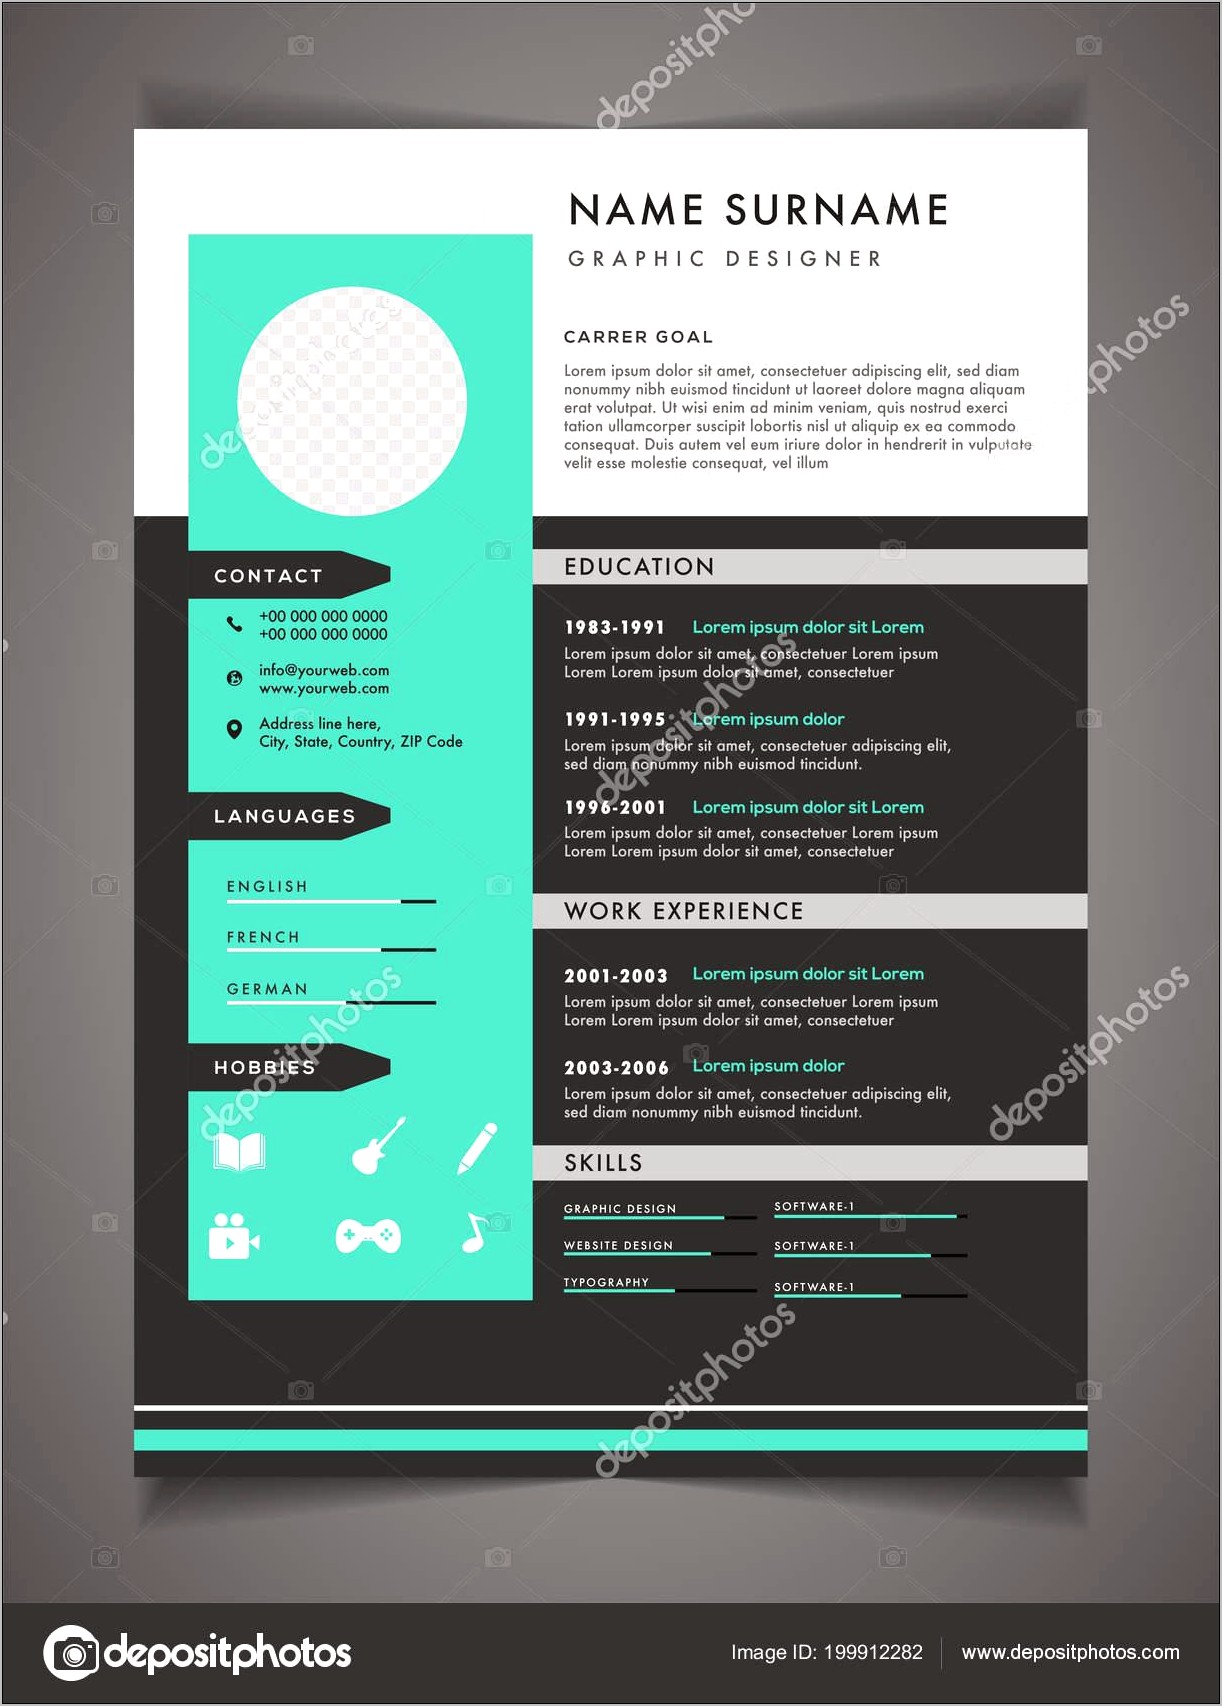 Get A Professionally Designed Cover Letter And Resume